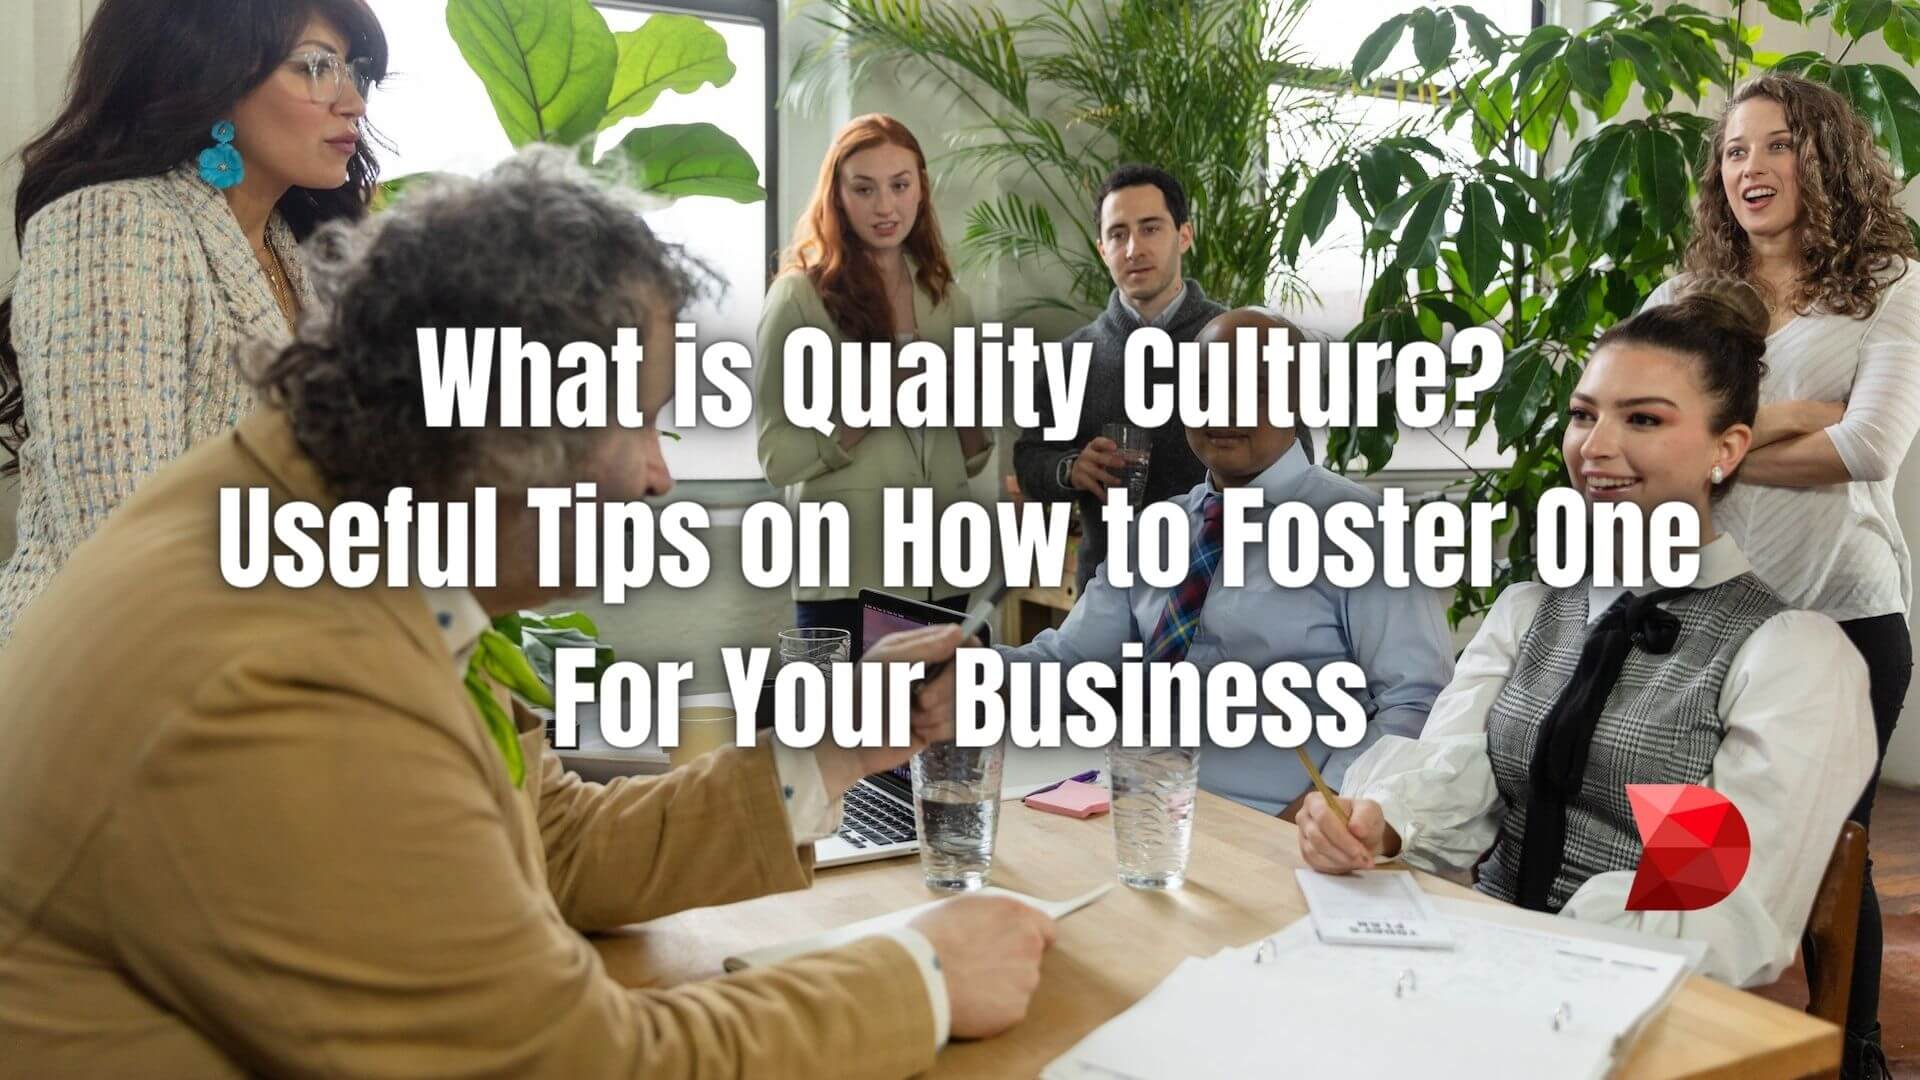 In this article, we'll talk about quality culture and tips on how to make one for your business. Read here to learn more!